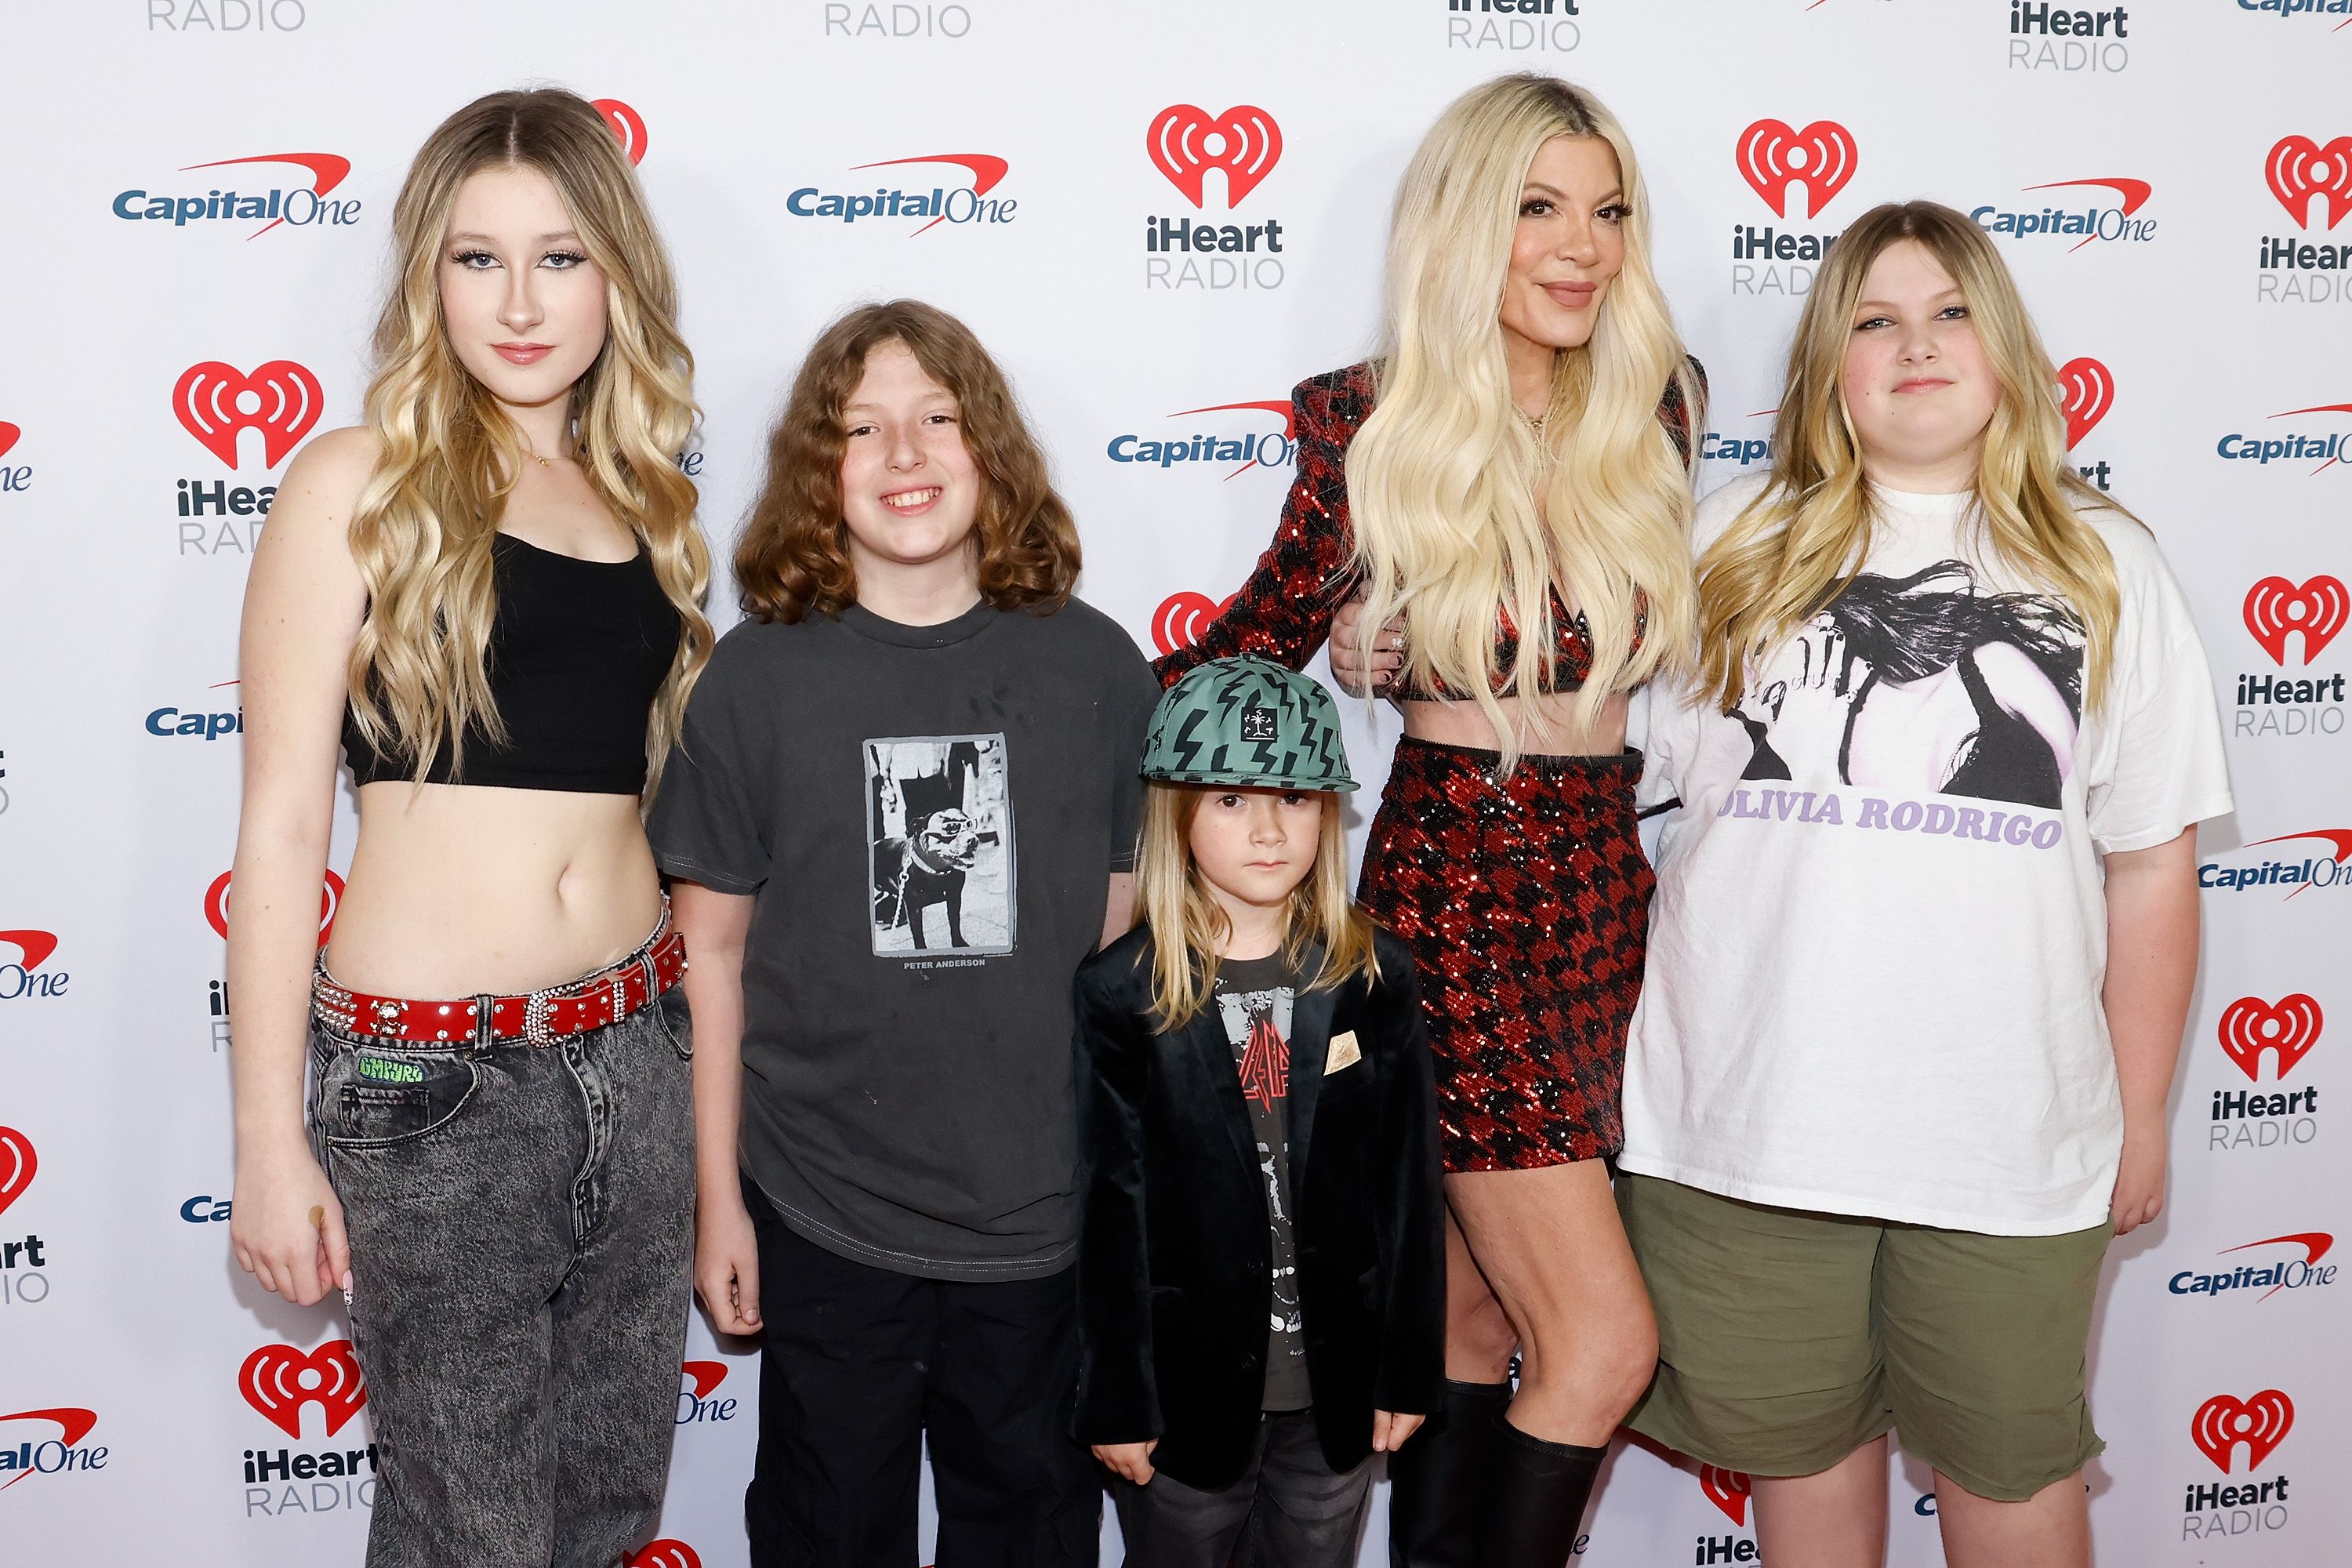 Tori Spelling, and her kids Stella Doreen, Finn, Beau, and Hattie McDermott attend the KIIS FM's iHeartRadio Jingle Ball 2023 Presented By Capital One at The Kia Forum on December 01, 2023 in Inglewood, California. | Source: Getty Images